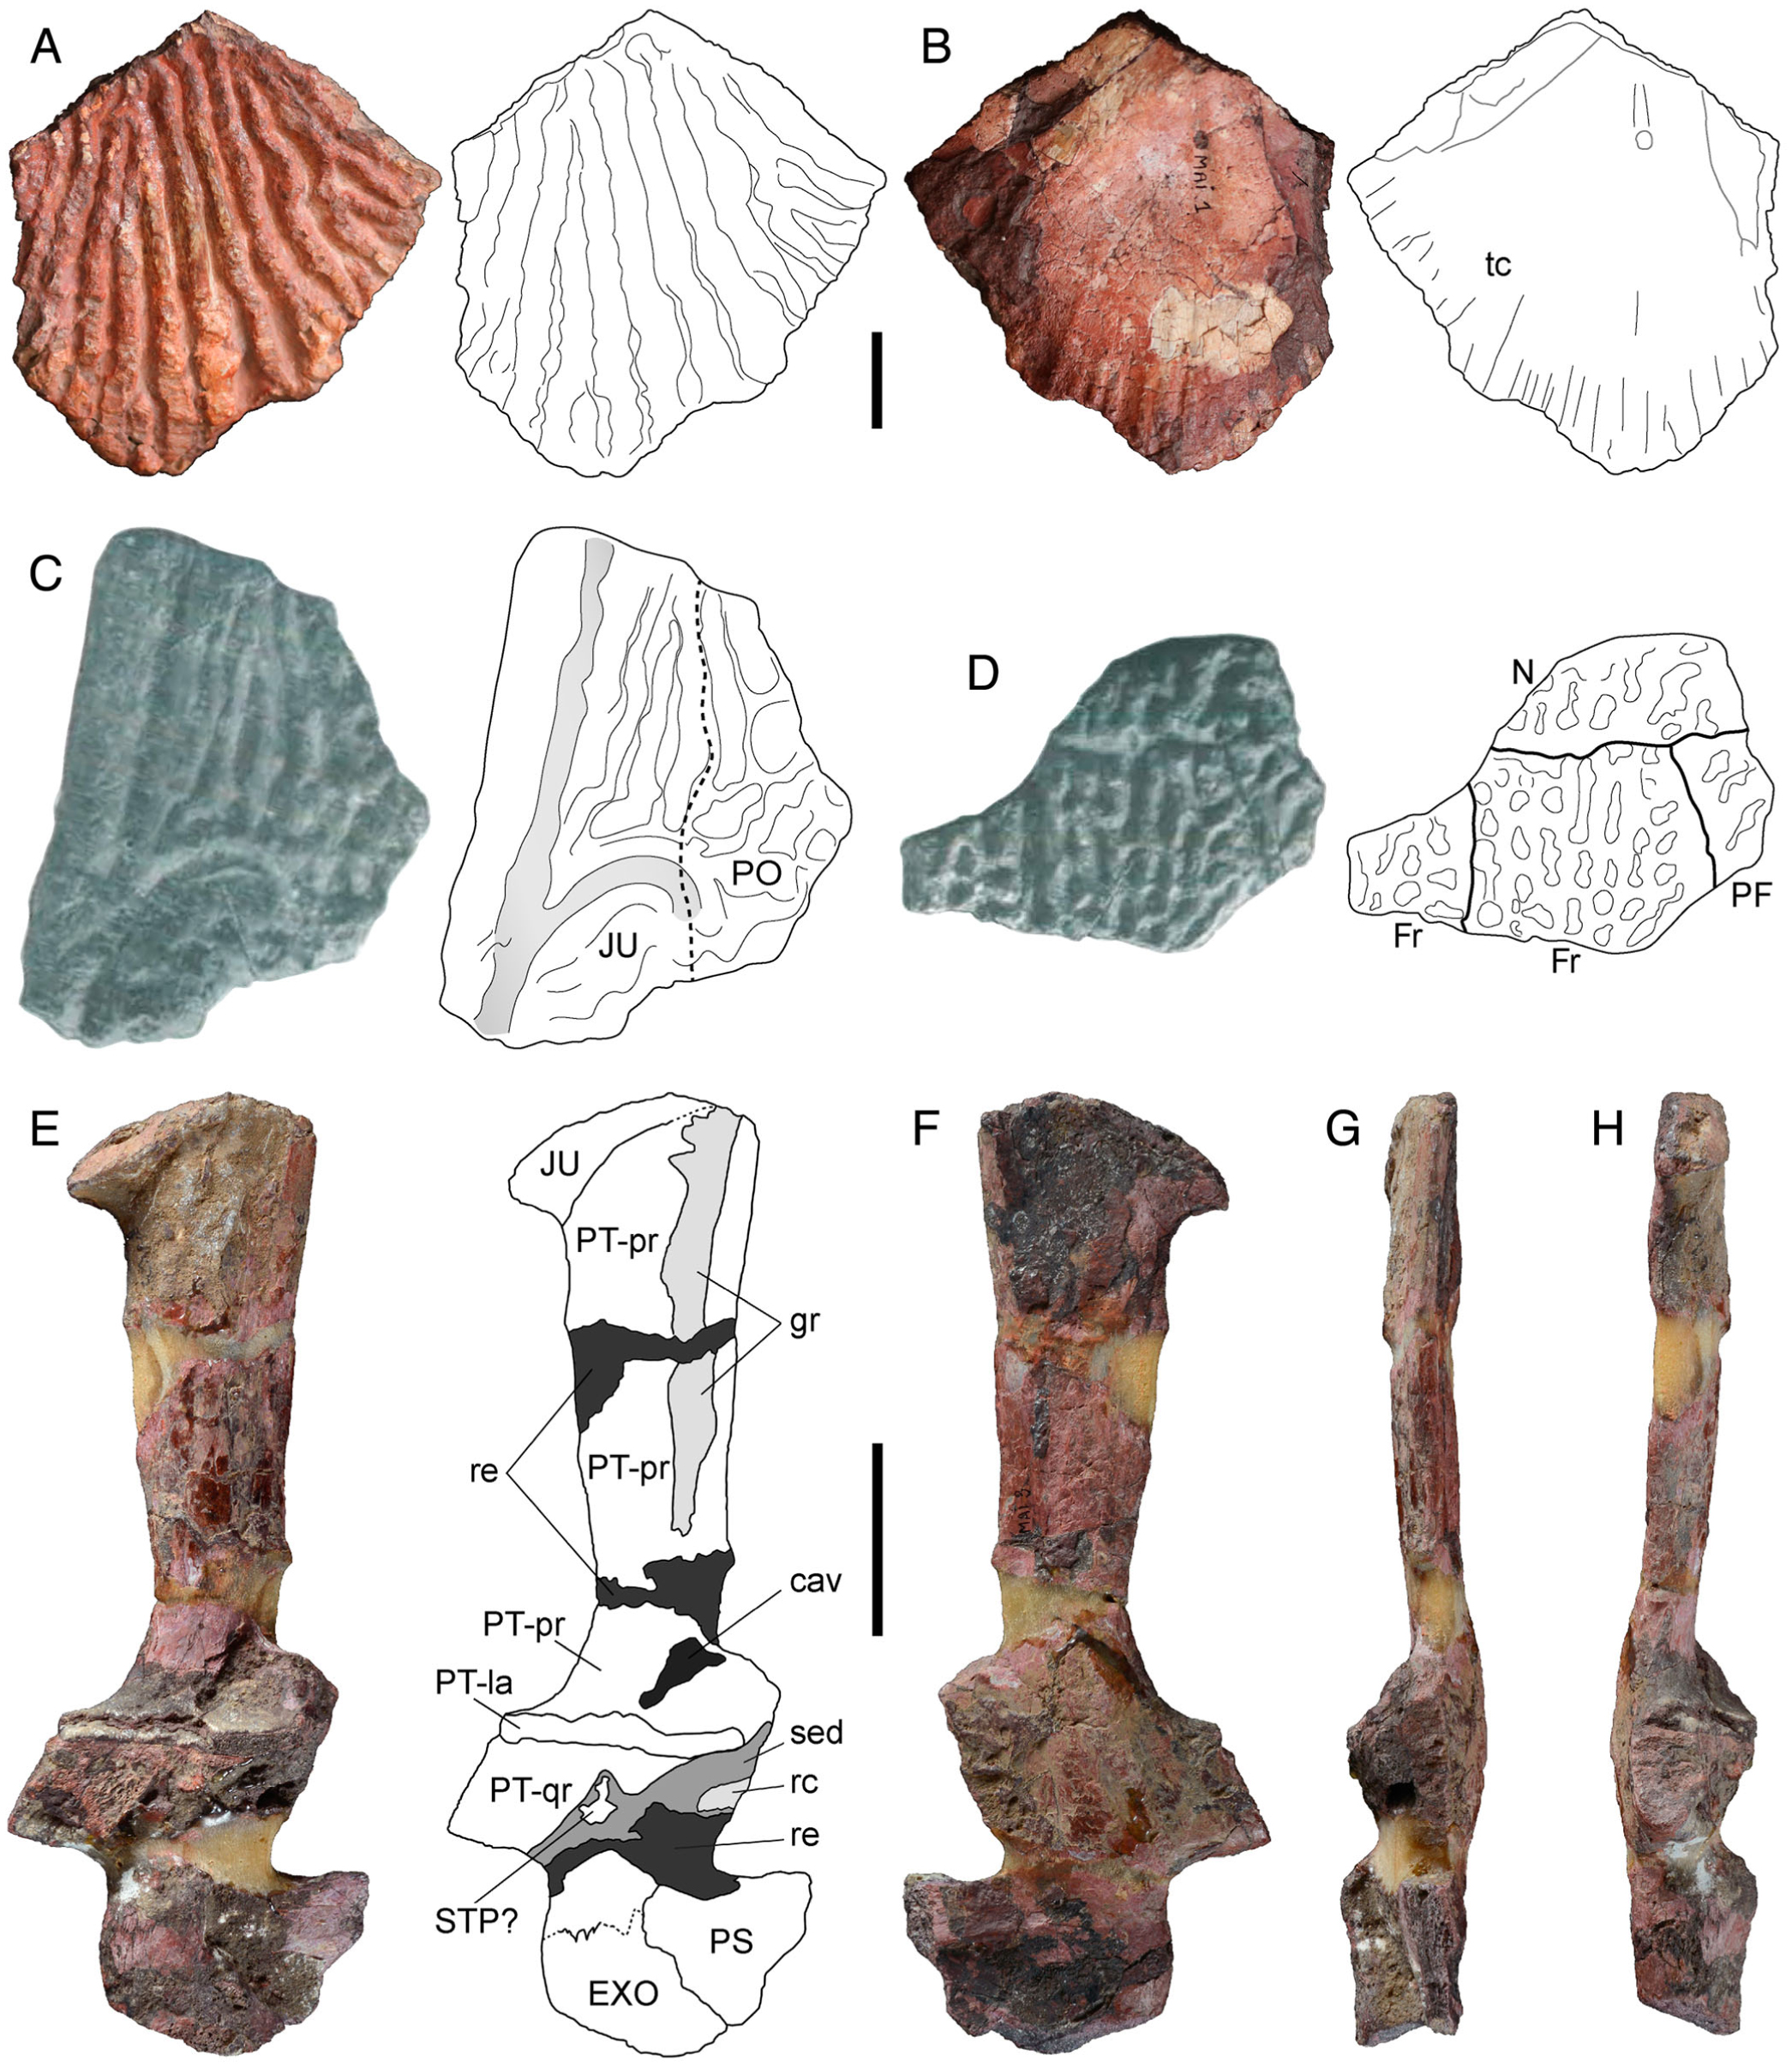 Reappraisal Of Metoposaurus Hoffmani Dutuit 1978 And Description Of New Temnospondyl Specimens From The Middle Late Triassic Of Madagascar Morondava Basin